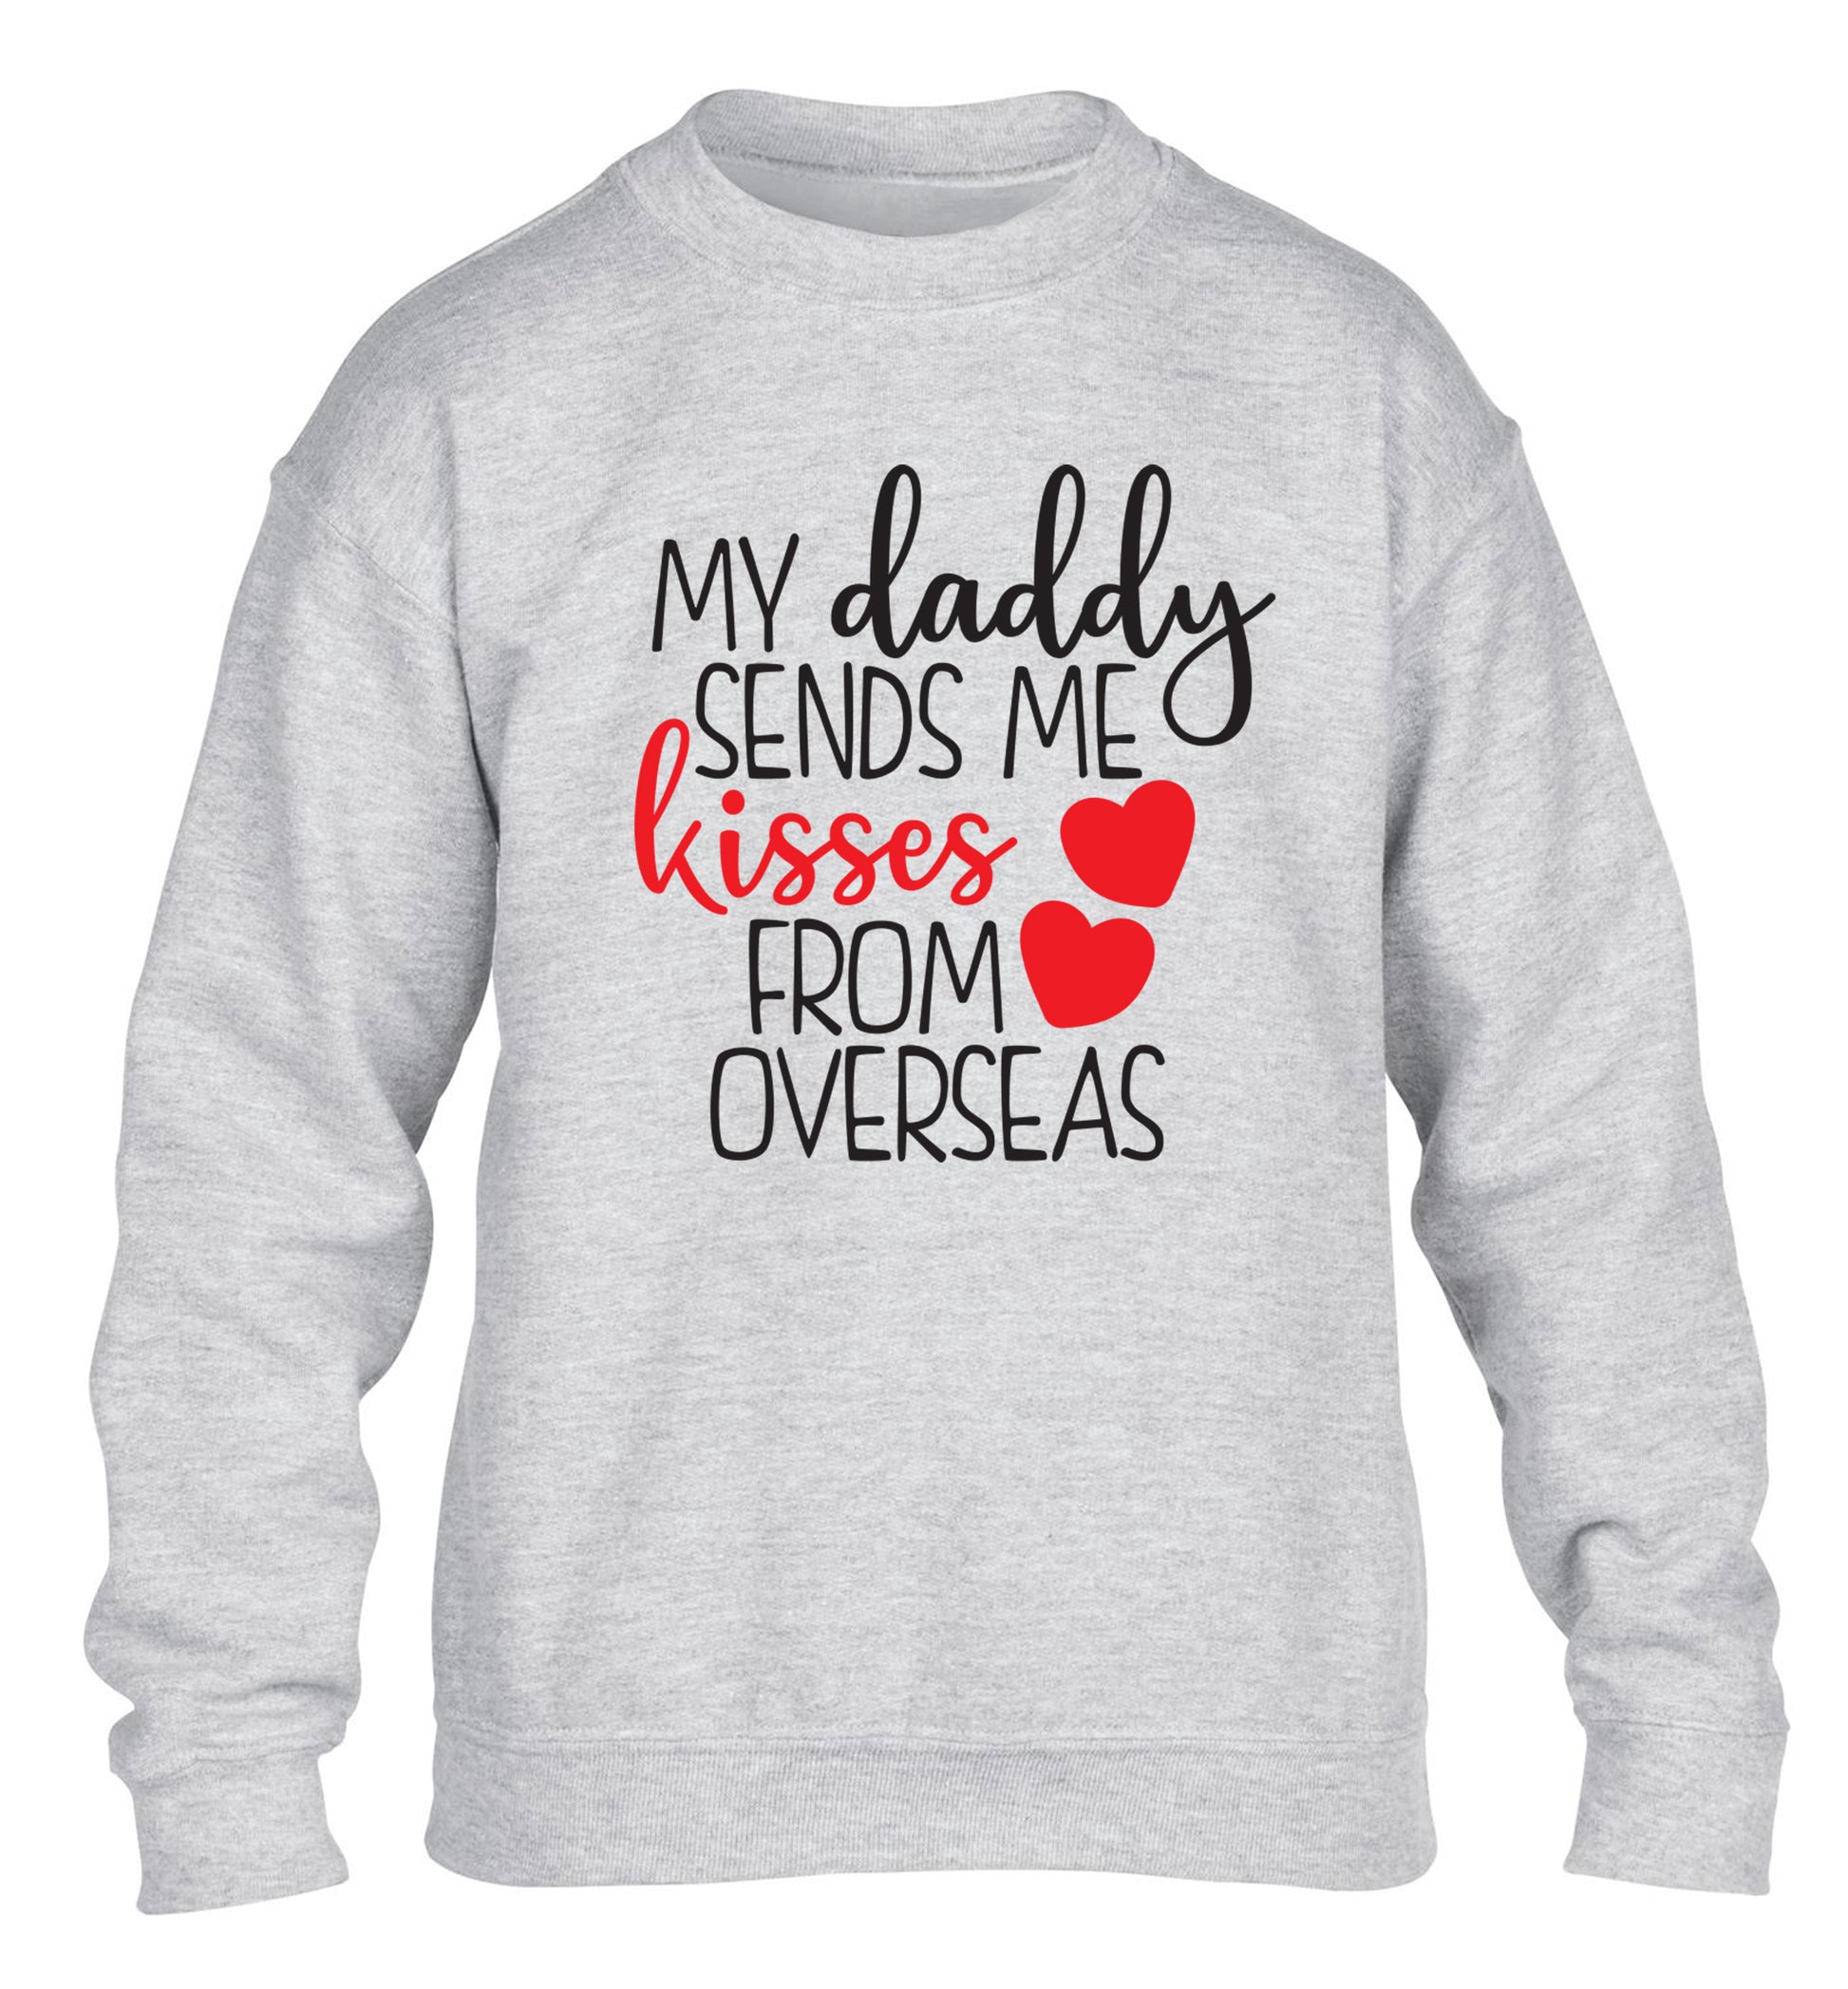 My daddy sends me kisses from overseas children's grey sweater 12-13 Years